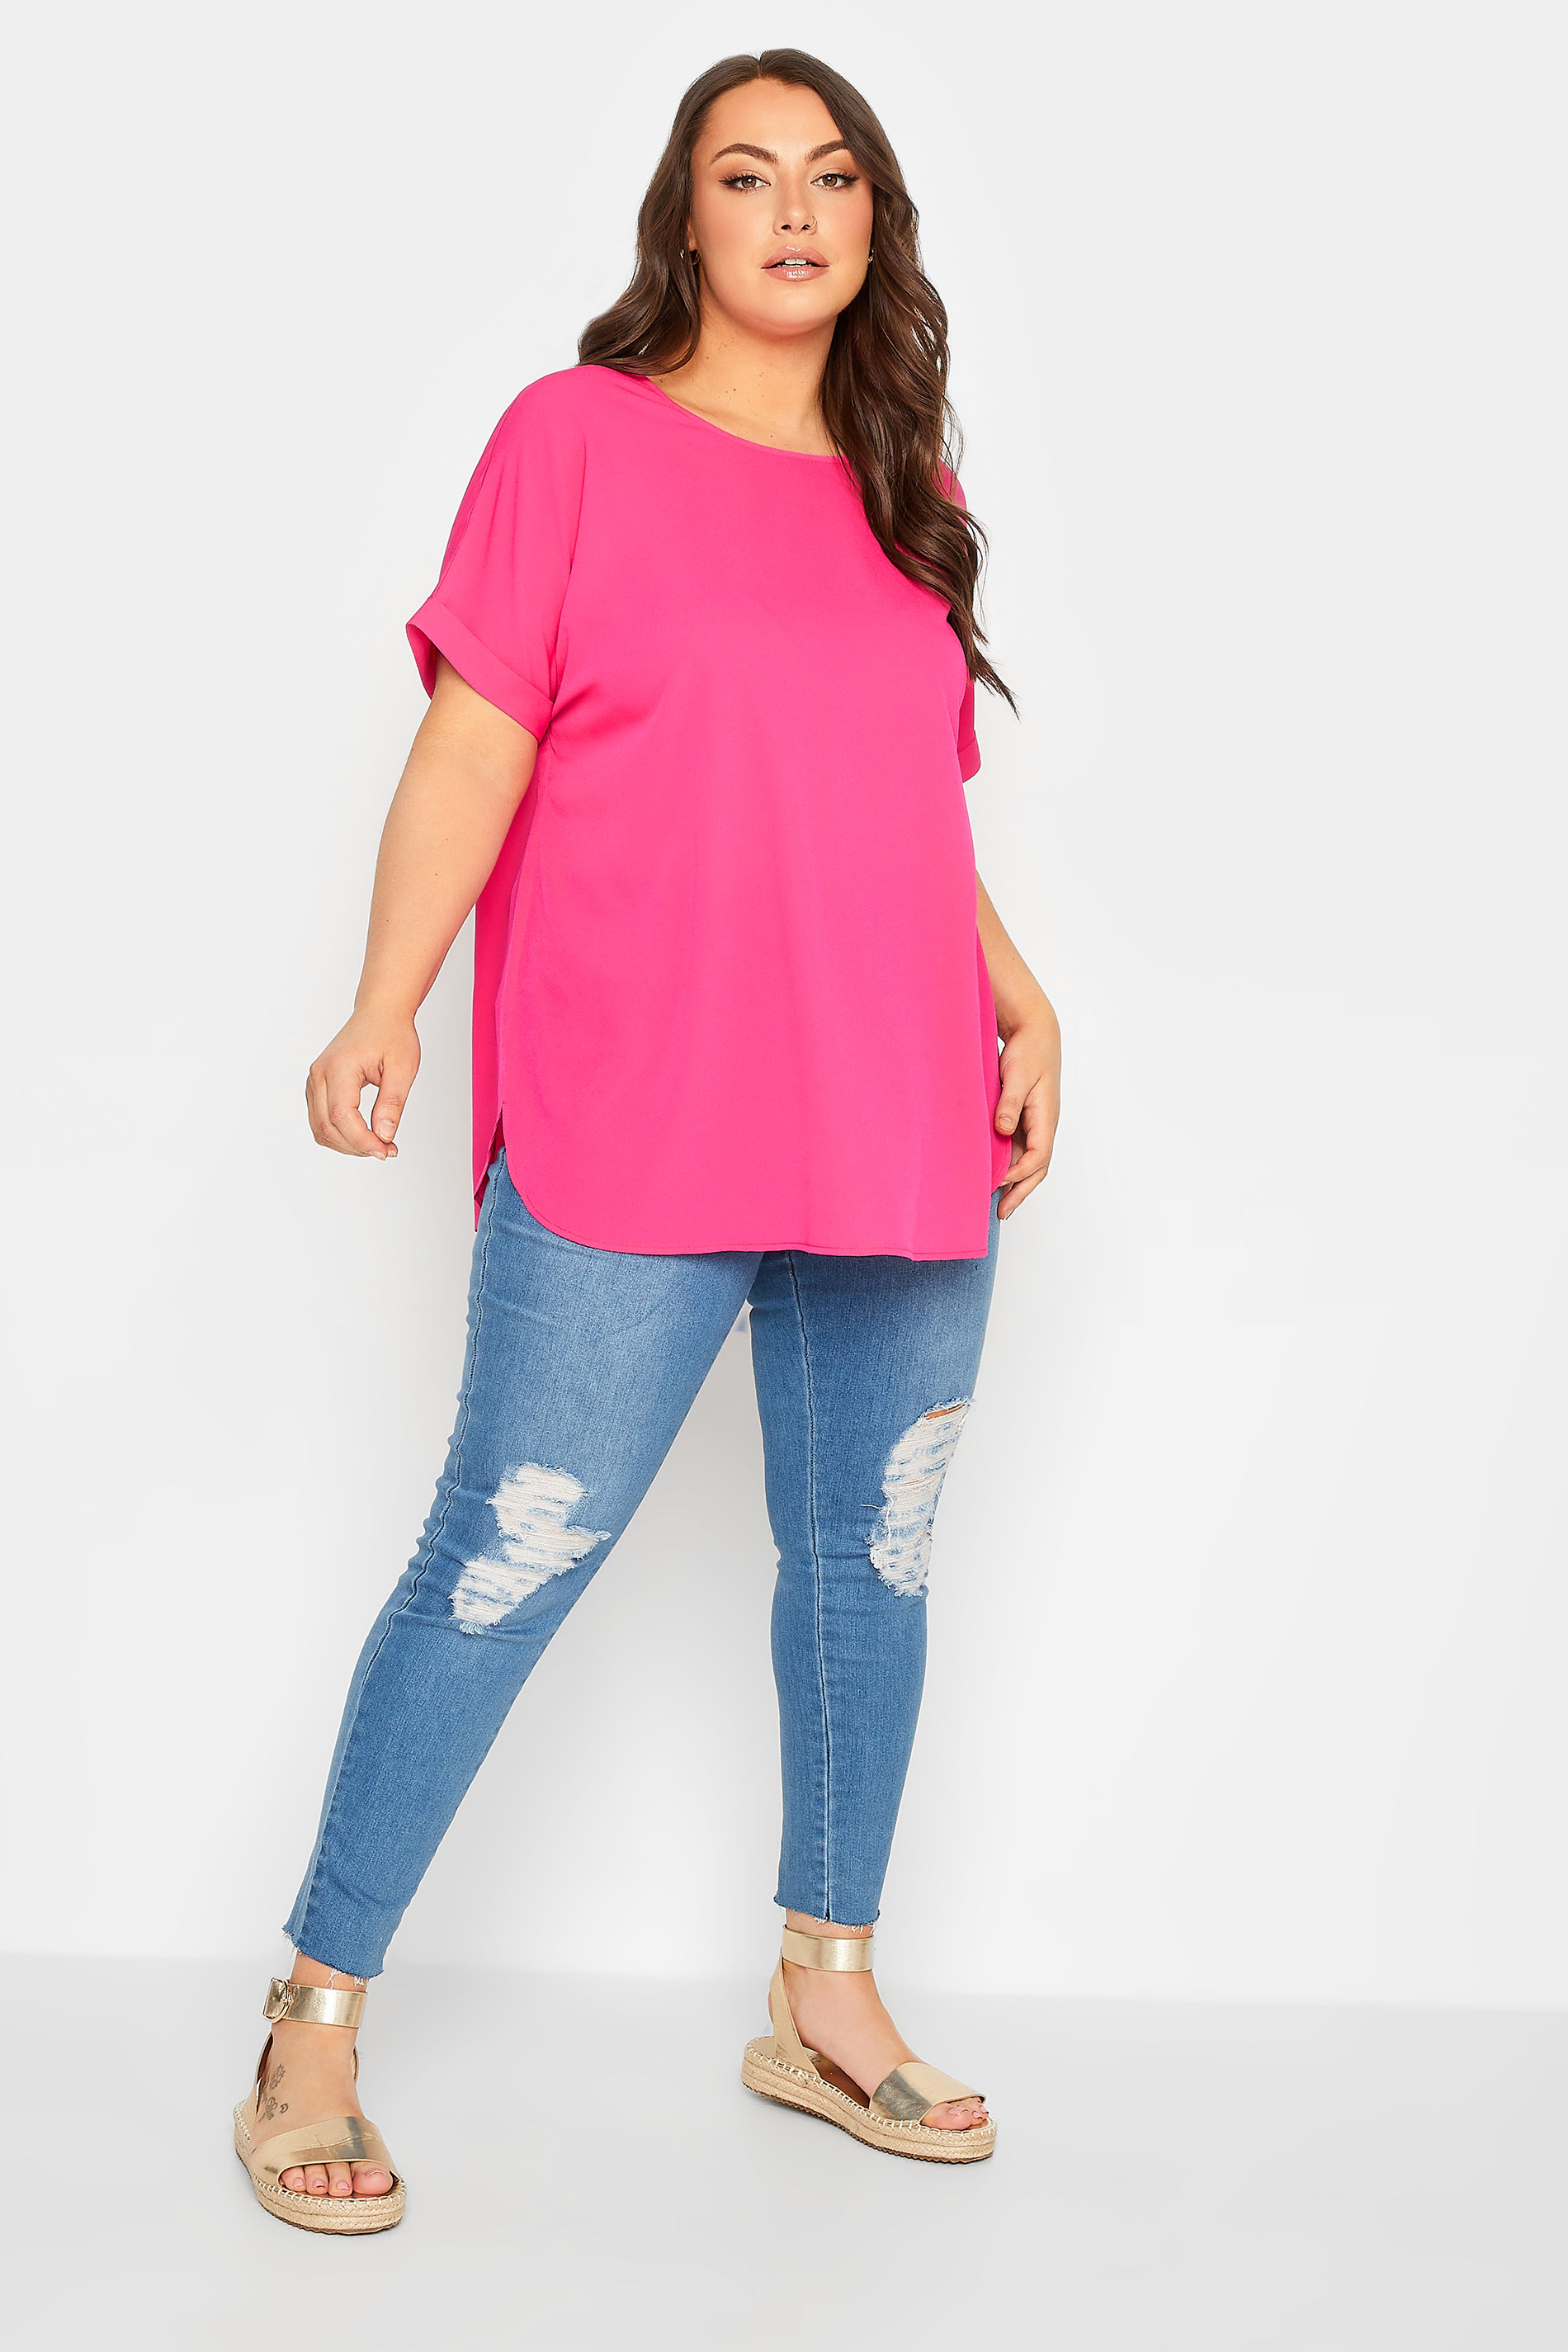 YOURS Plus Size Hot Pink Short Sleeve Boxy Top | Yours Clothing 2